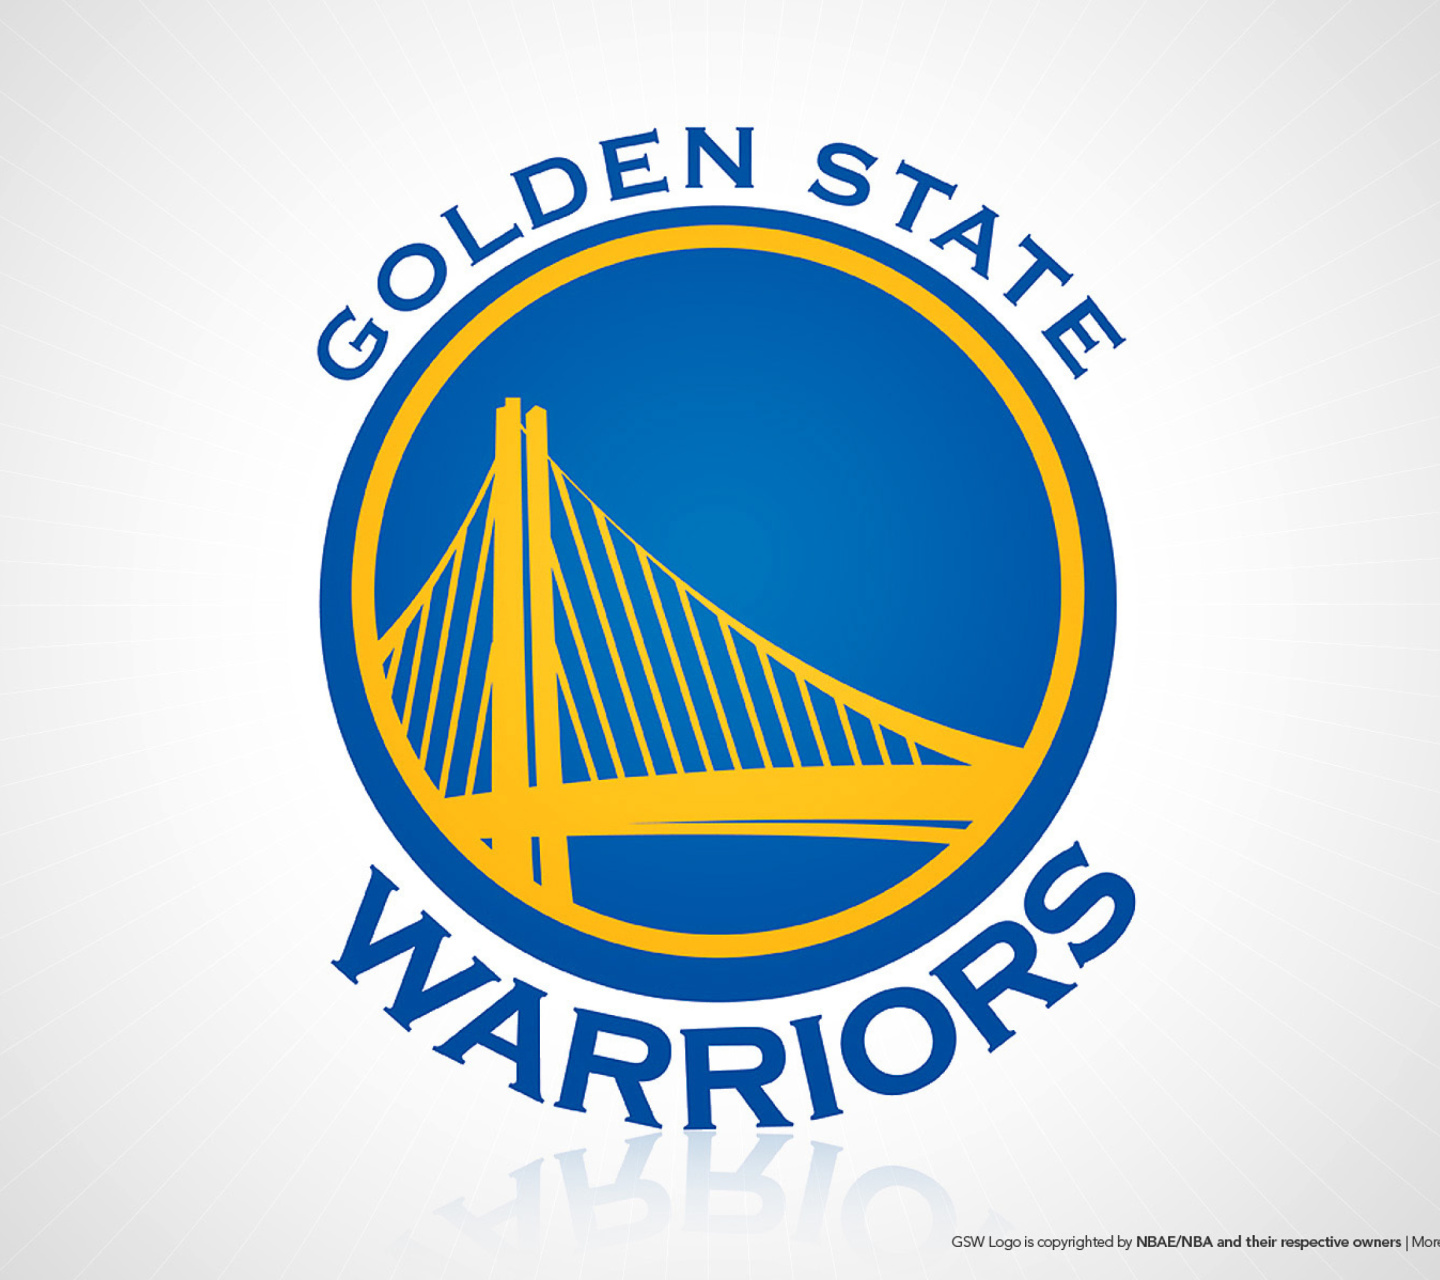 Golden State Warriors, Pacific Division screenshot #1 1440x1280